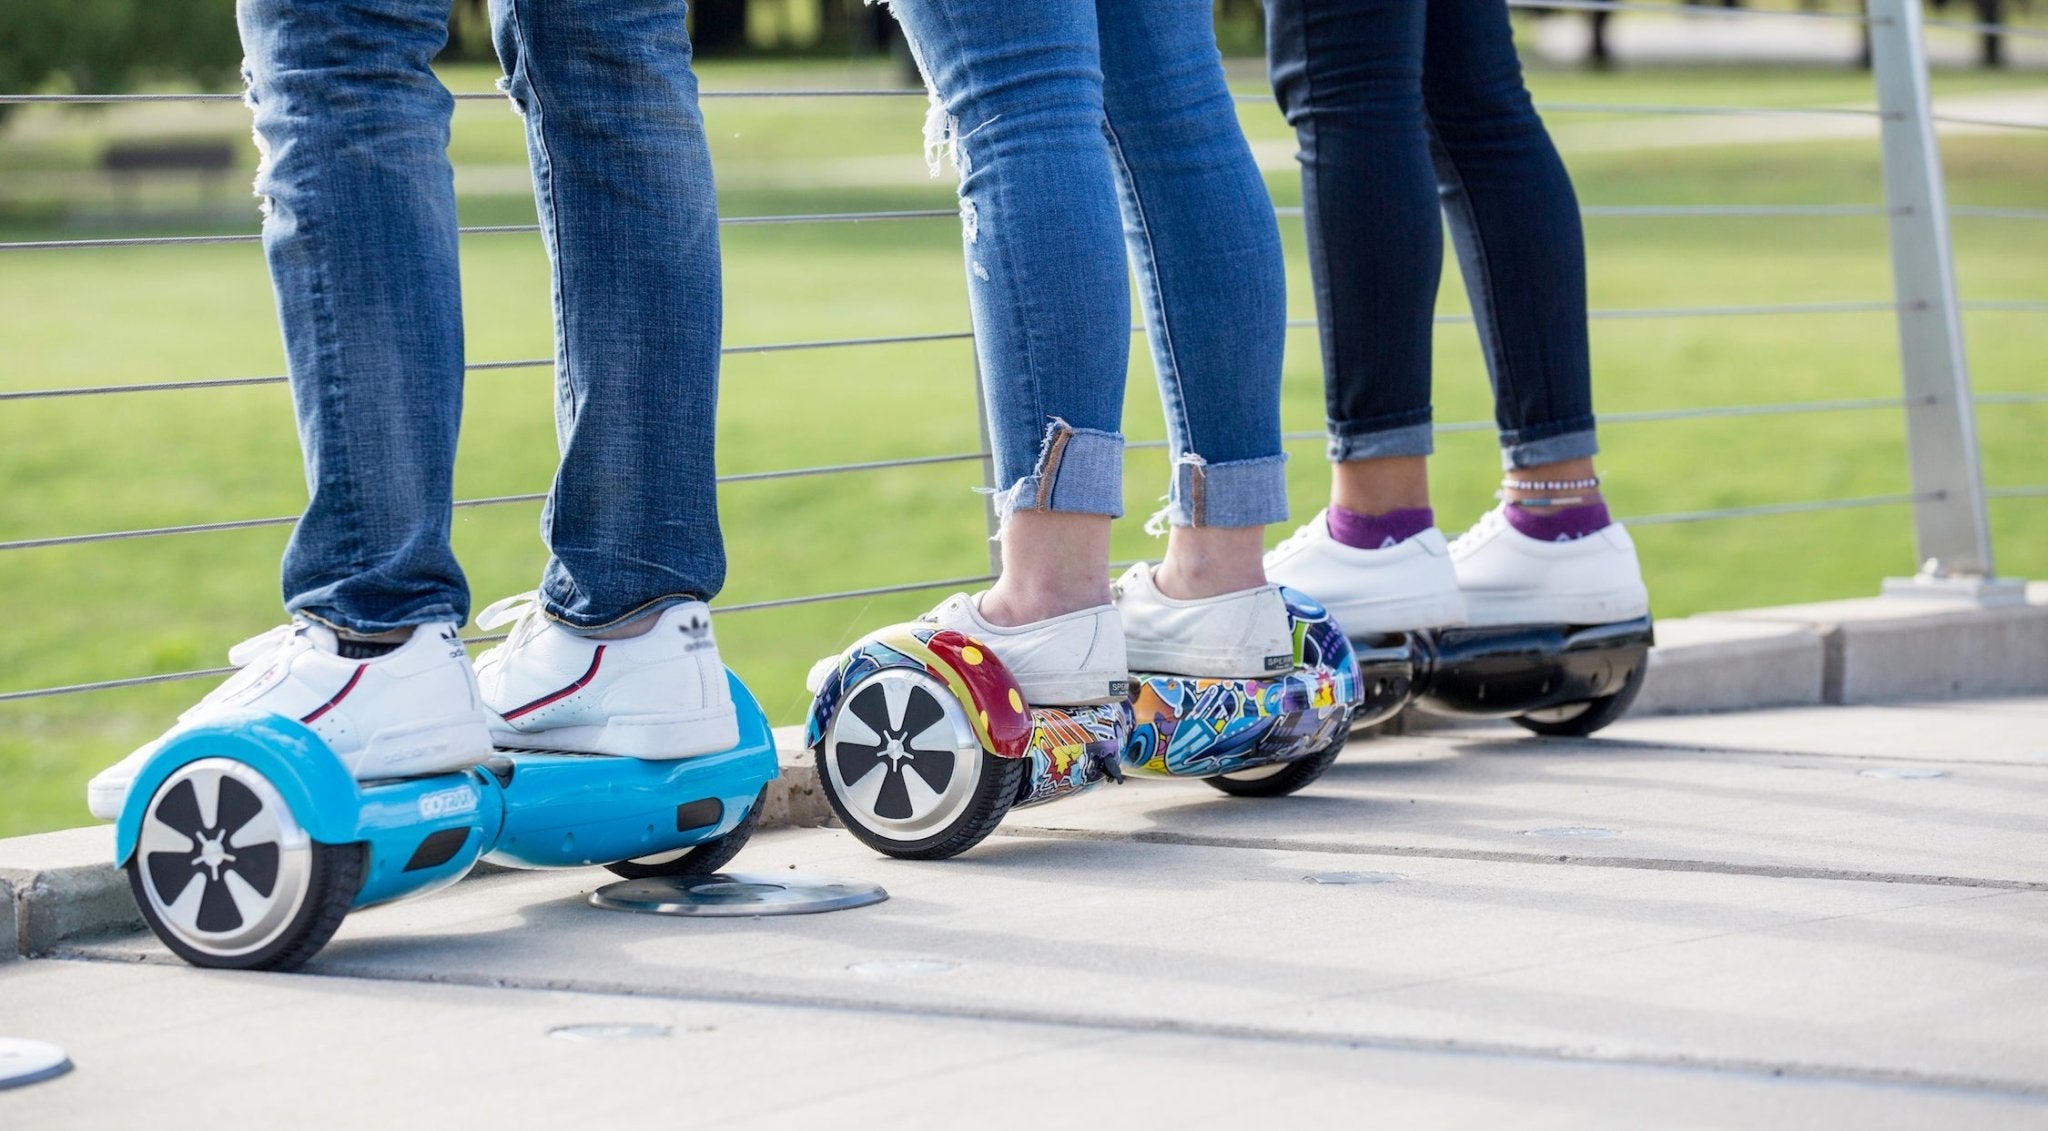 What is a Hoverboard and how does it work? - GOTRAX